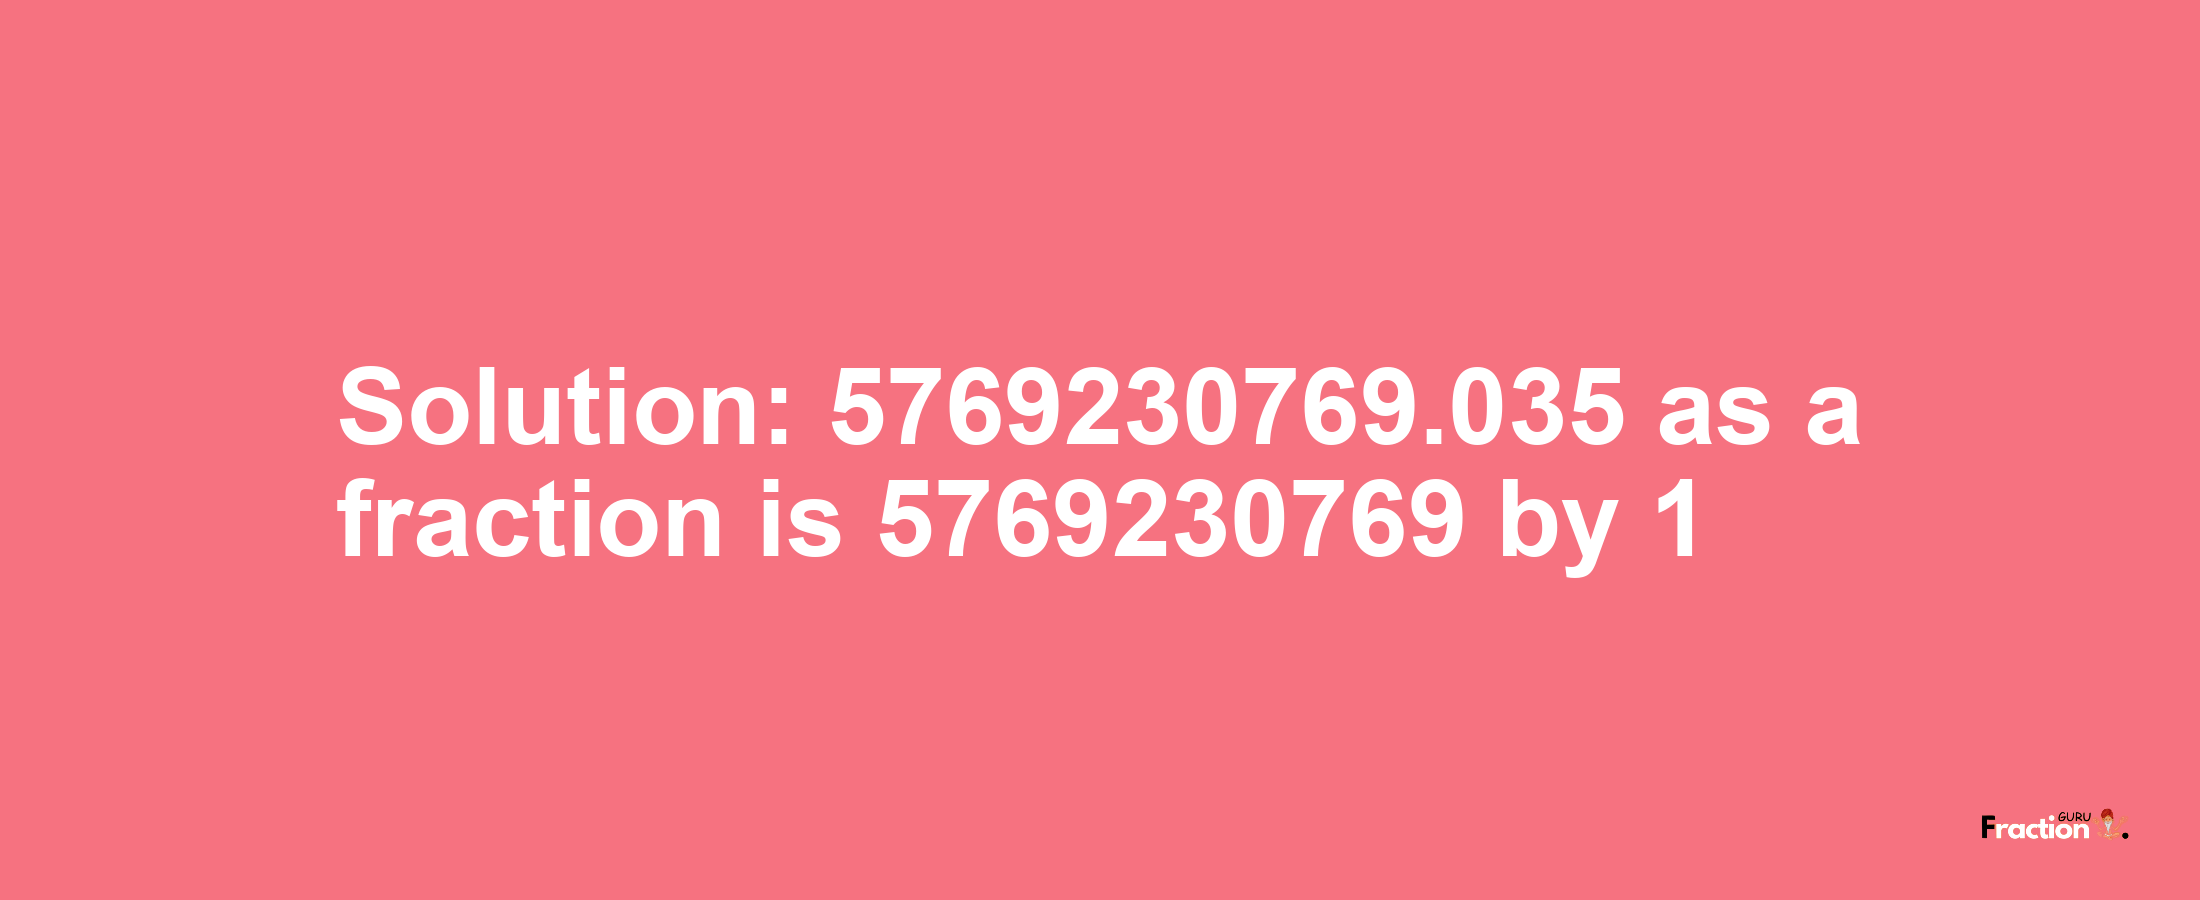 Solution:5769230769.035 as a fraction is 5769230769/1